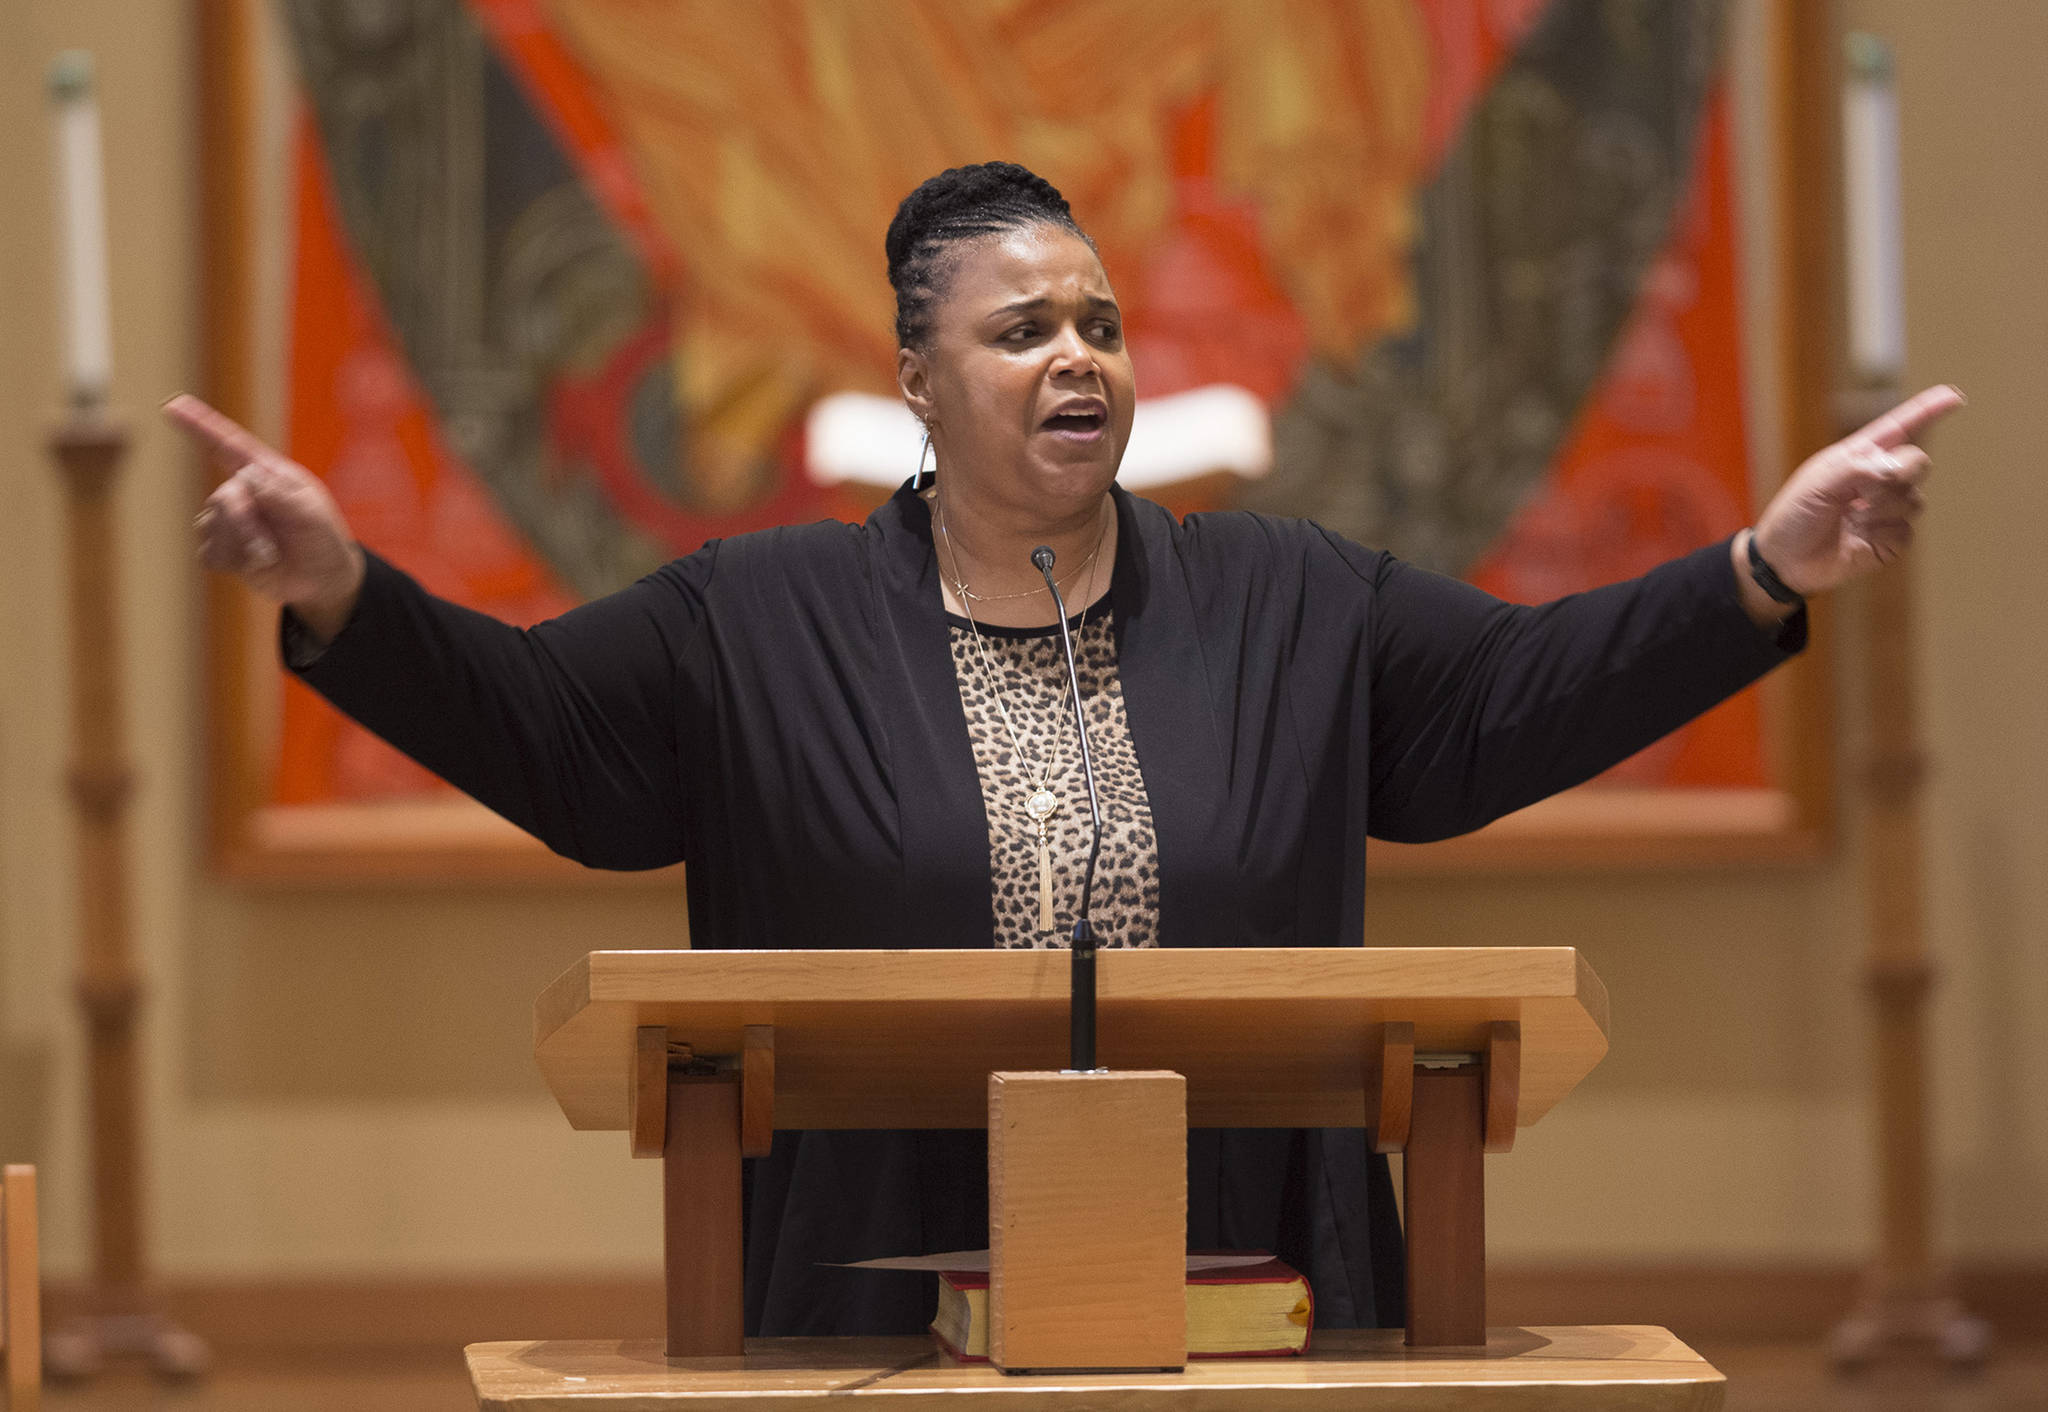 Sherry Patterson, president of the Black Awareness Association, gives the keynote address to Juneau residents during the Dr. Martin Luther King Jr. 2018 Community Celebration sponsored by the Black Awareness Association at St. Paul’s Catholic Church on Monday, Jan. 15, 2018. (Michael Penn | Juneau Empire)